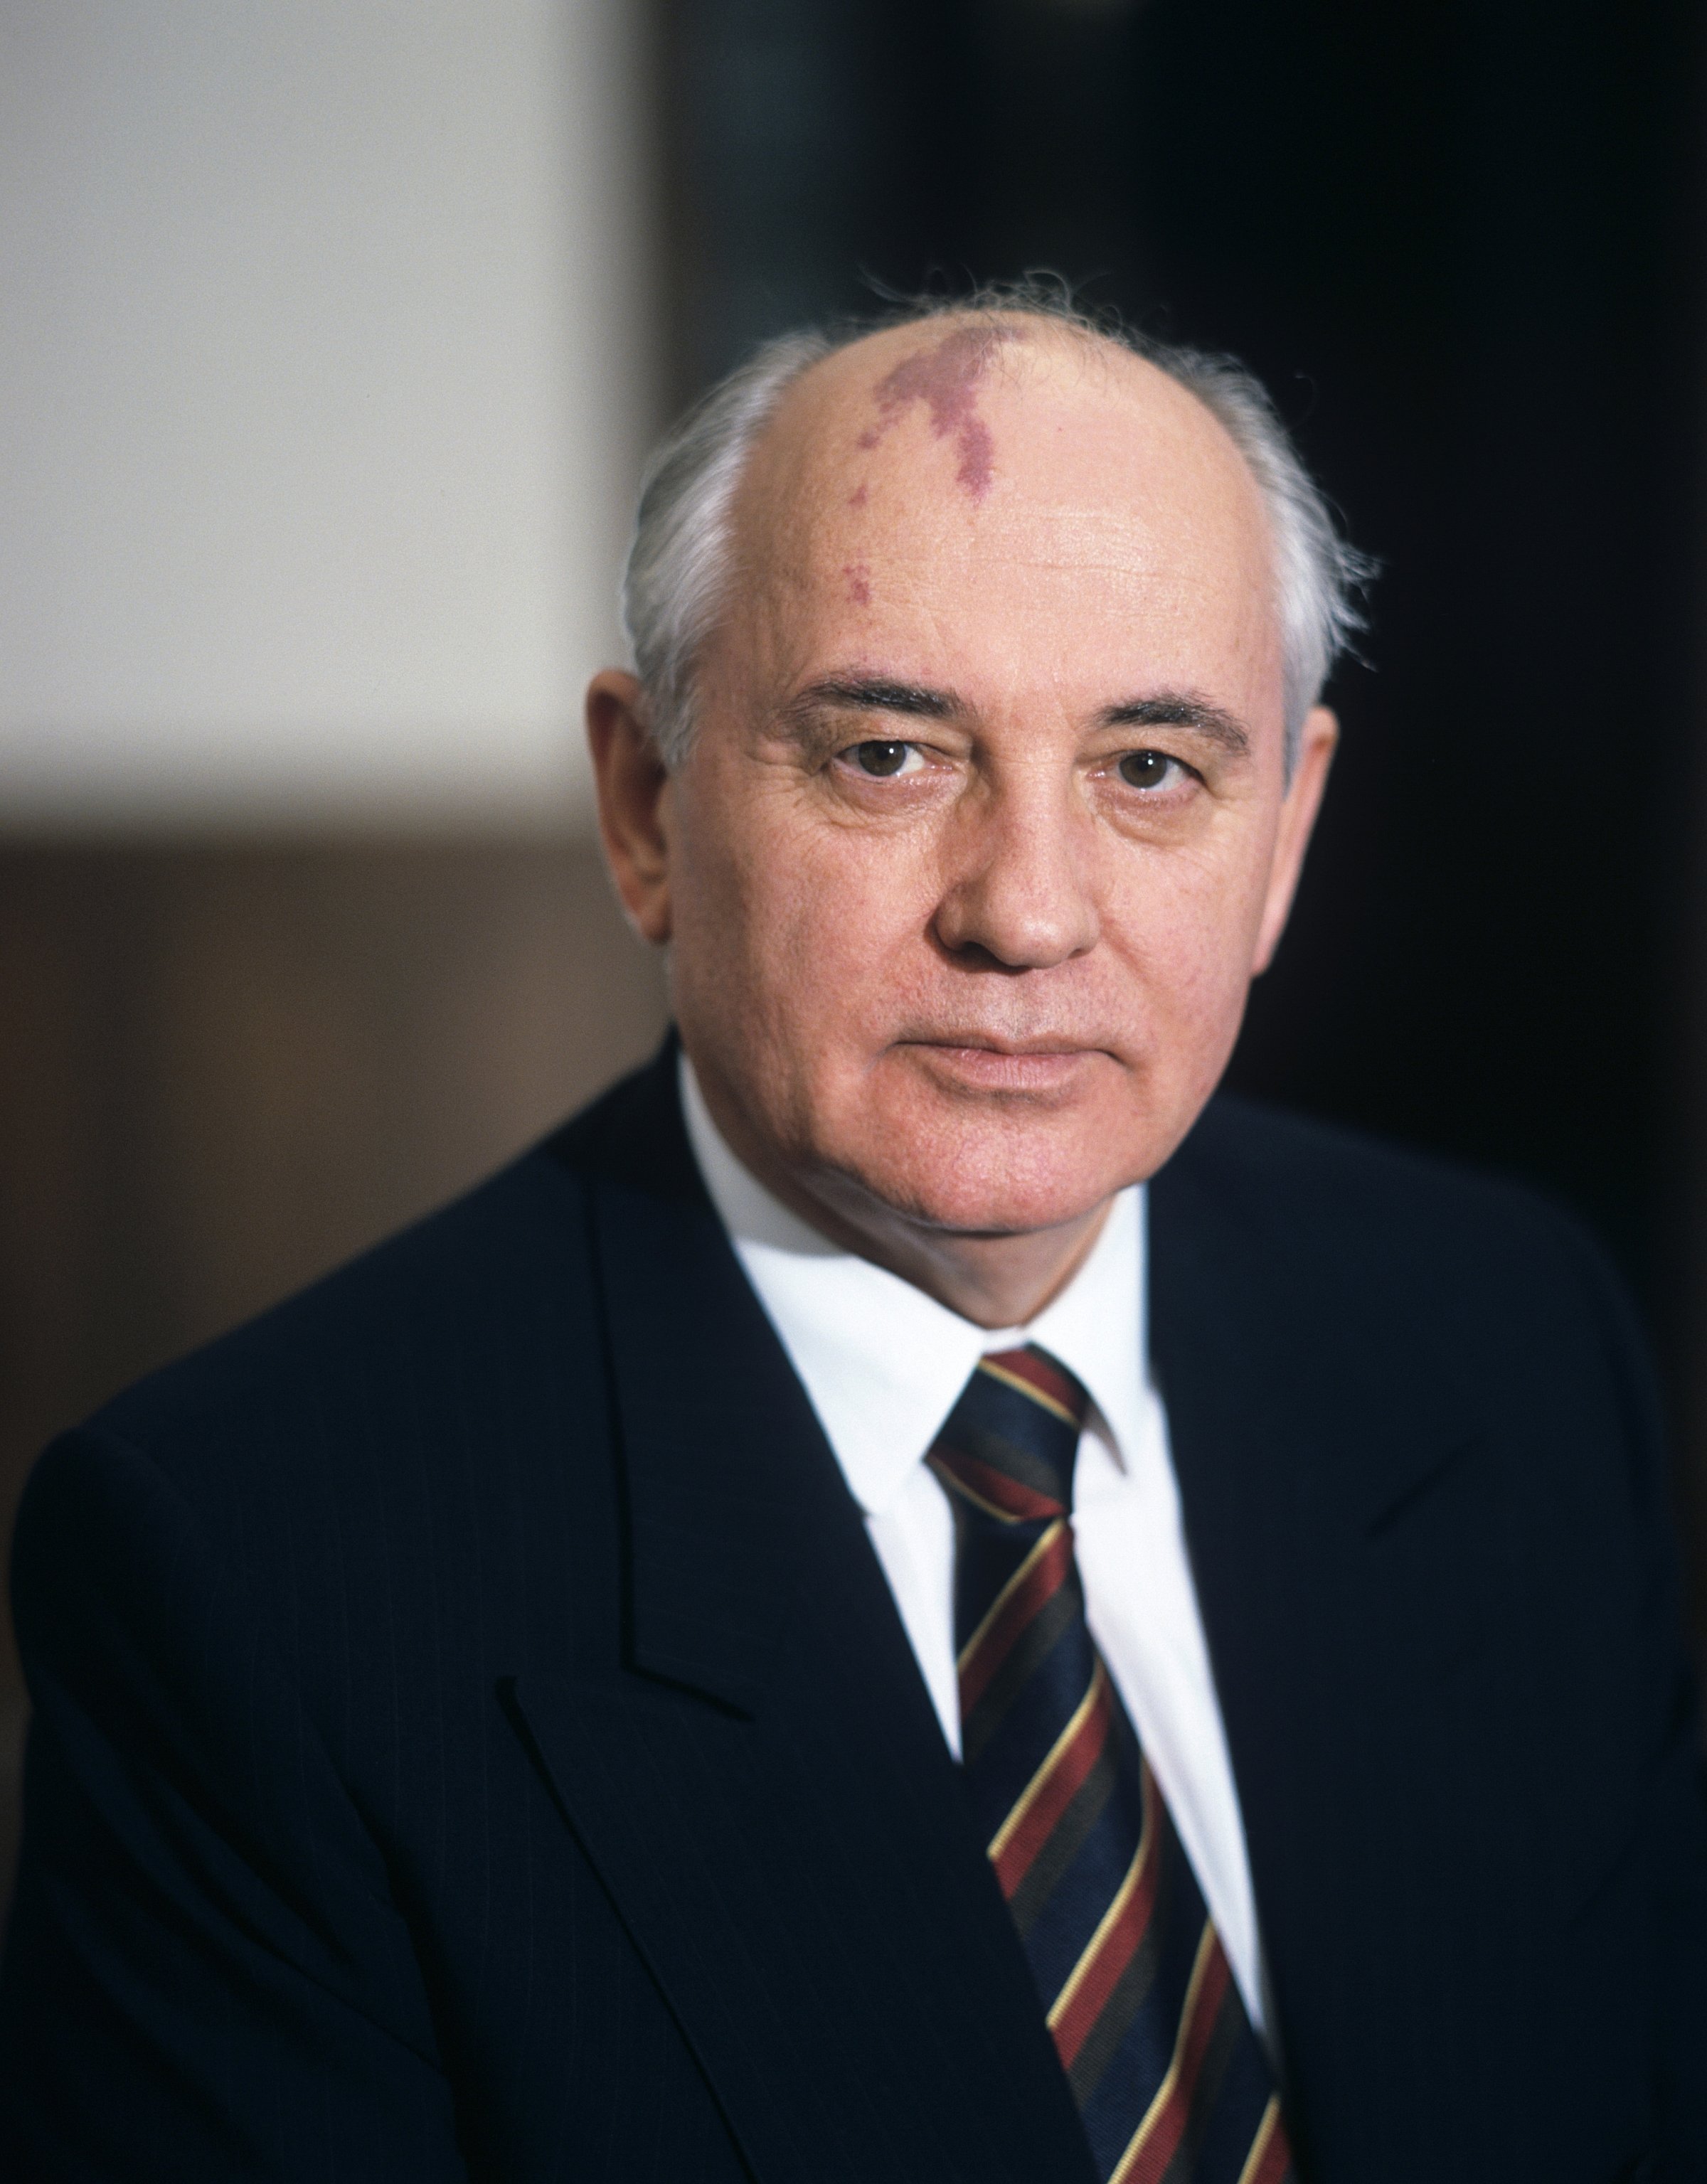 General Secretary of the Central Committee of the Communist Party of the Soviet Union Mikhail Gorbachev in the mid 80's in Moscow, Russia.